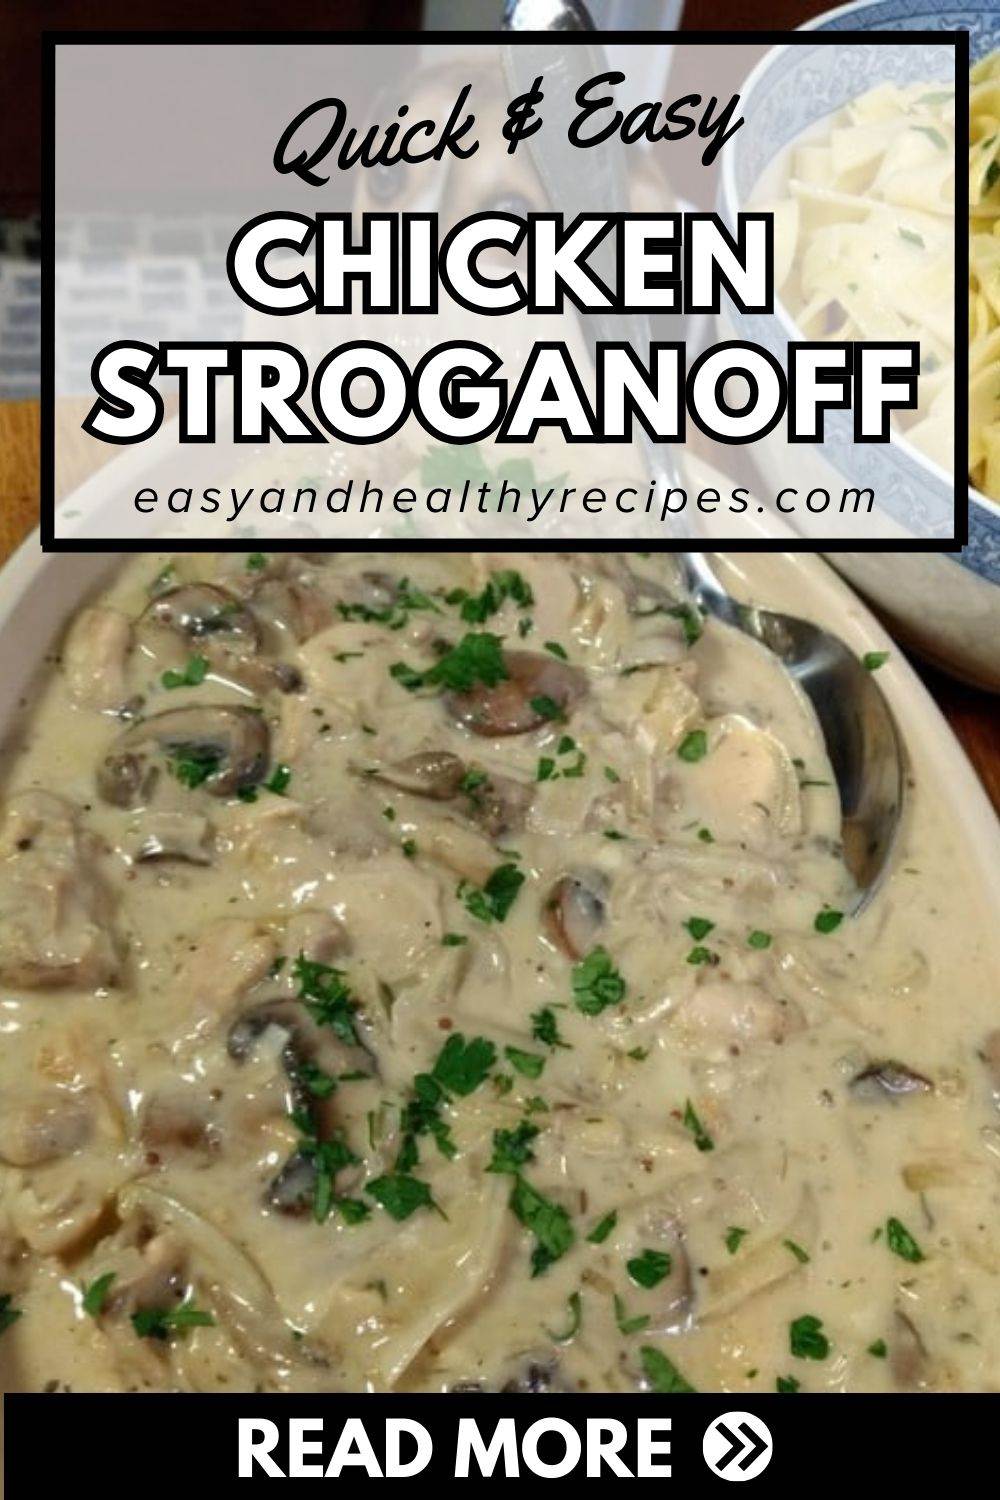 The Best Chicken Stroganoff Recipe Ever - Easy and Healthy Recipes